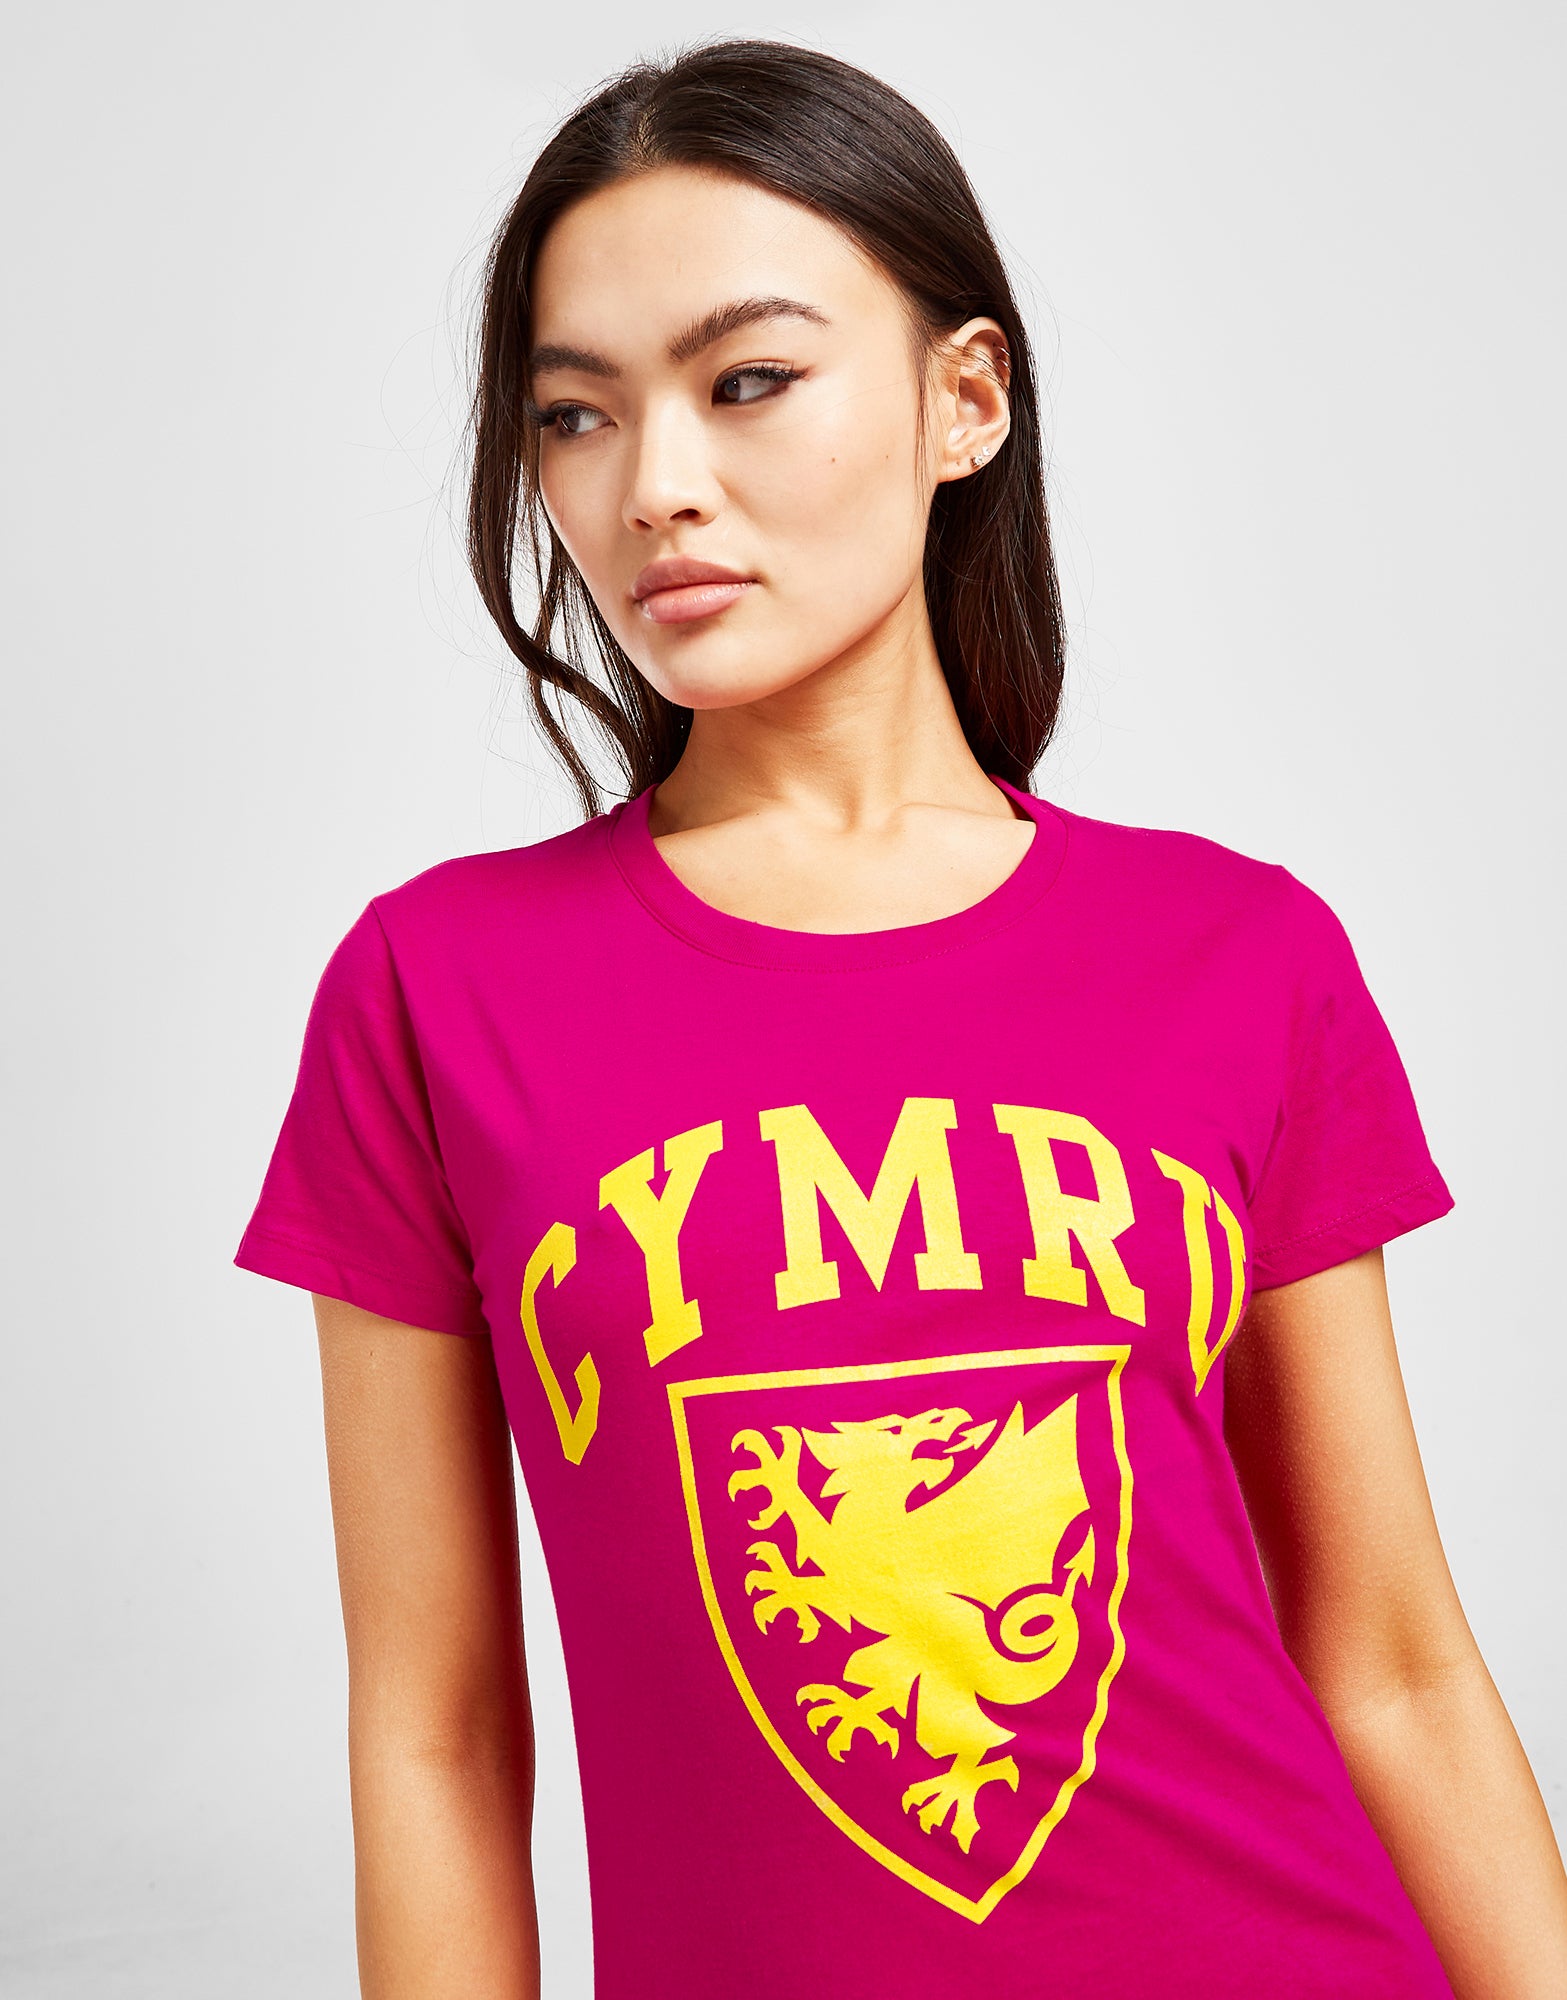 Official Team Wales Womens T-Shirt - Pink - The World Football Store